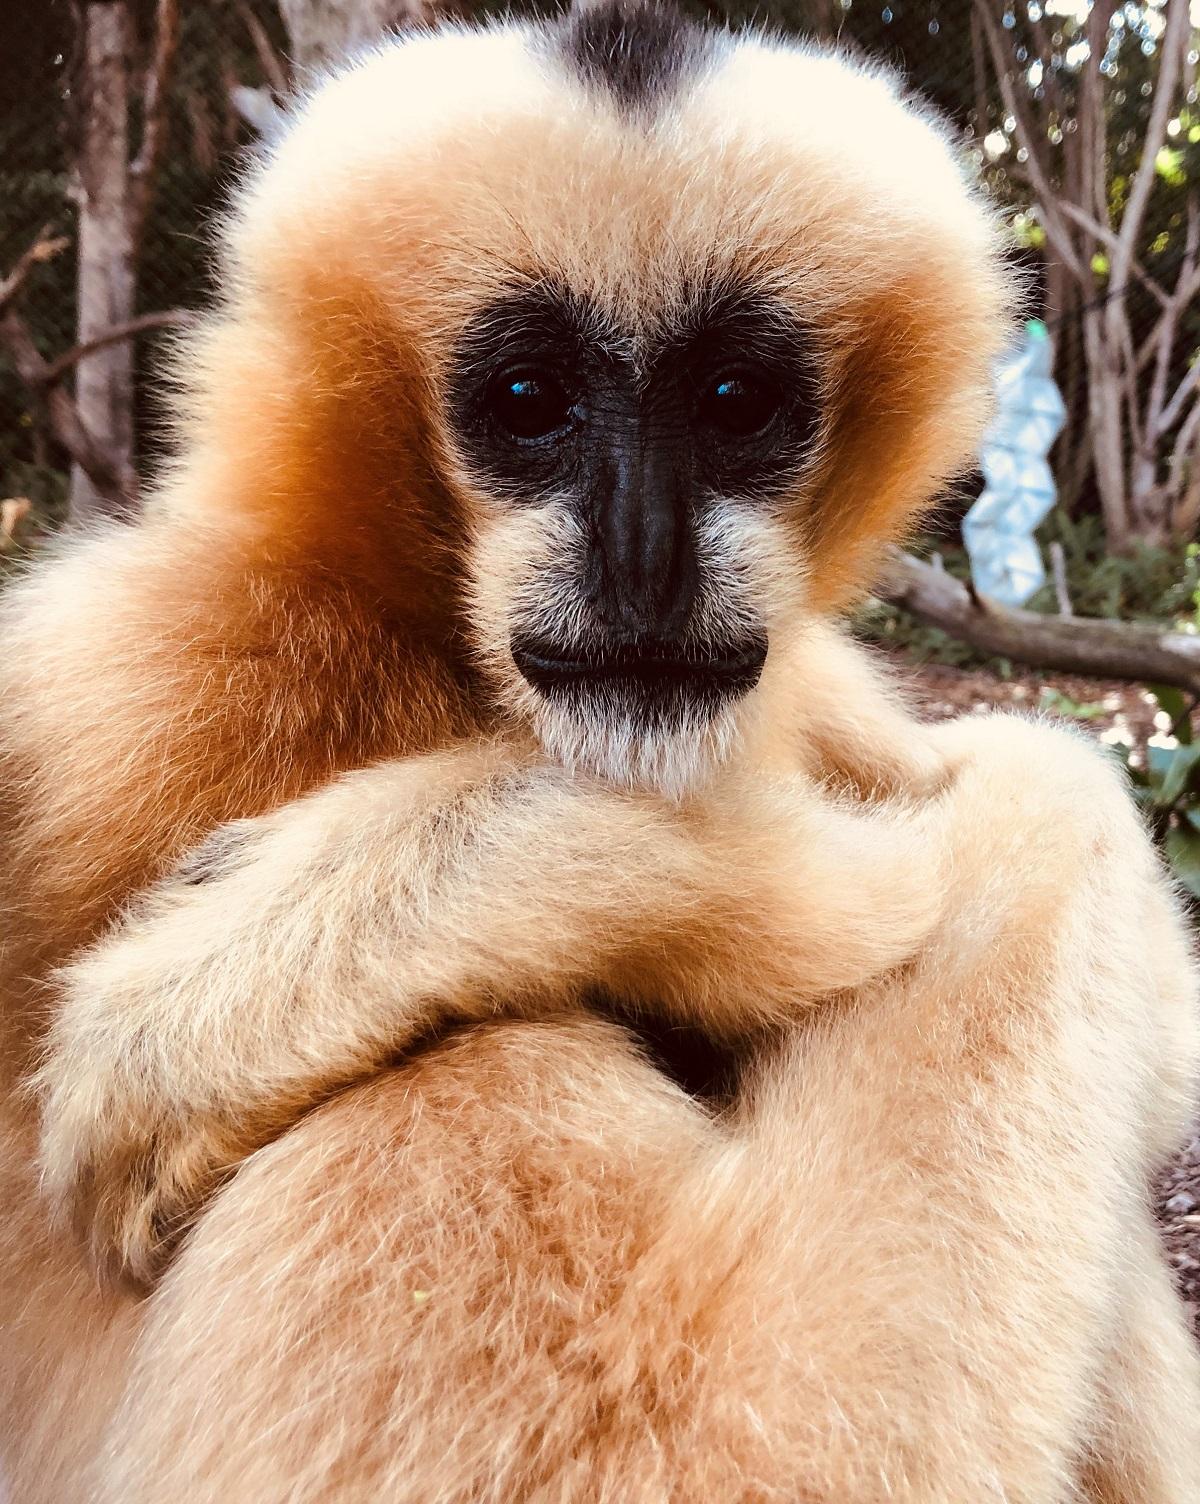 Jermei, mother of the newborn white-cheeked gibbon that was introduced to the public on June 5, 2019. (Perth Zoo)